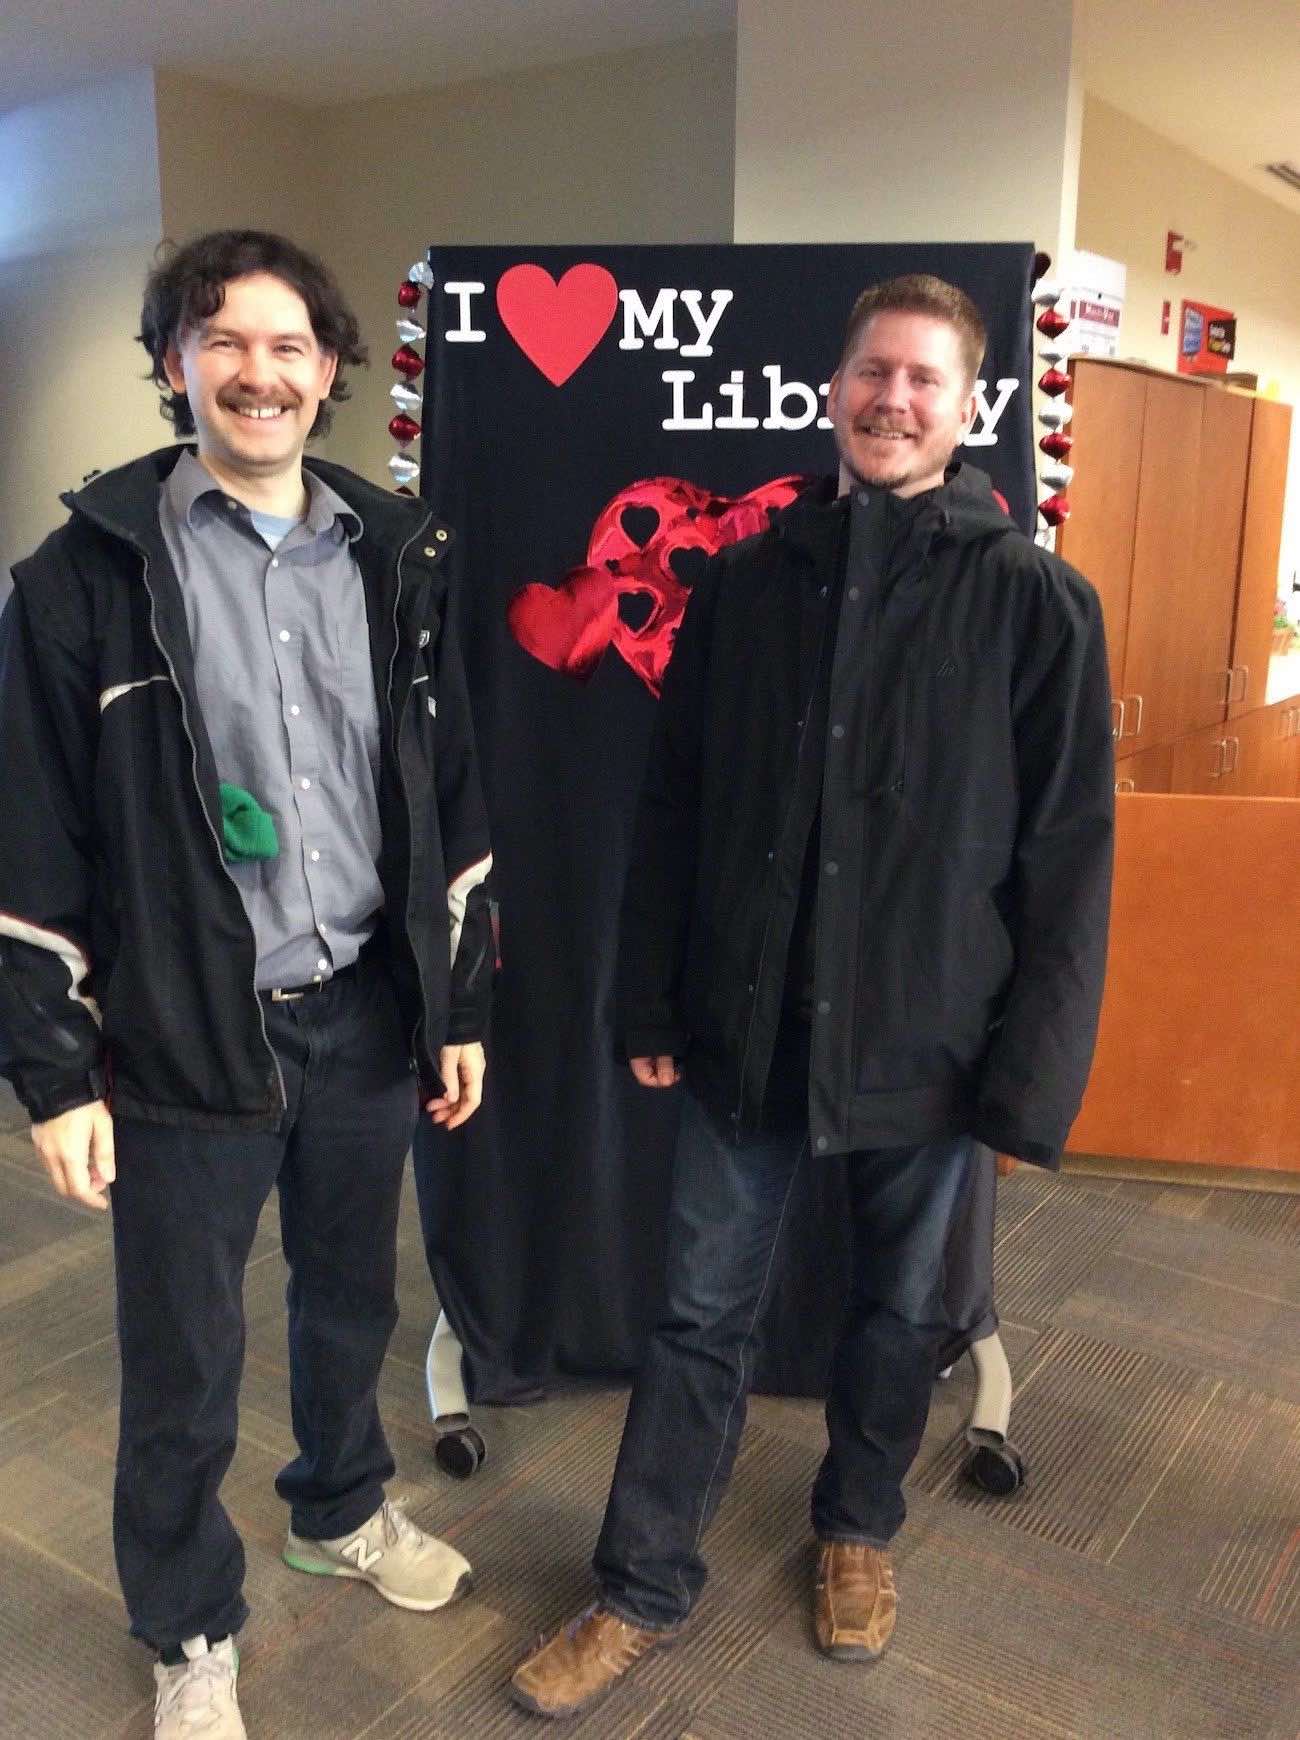 Two members of the University's IT department stand in front of the I love my Library backdrop wearing outerwear and smiling for the camera